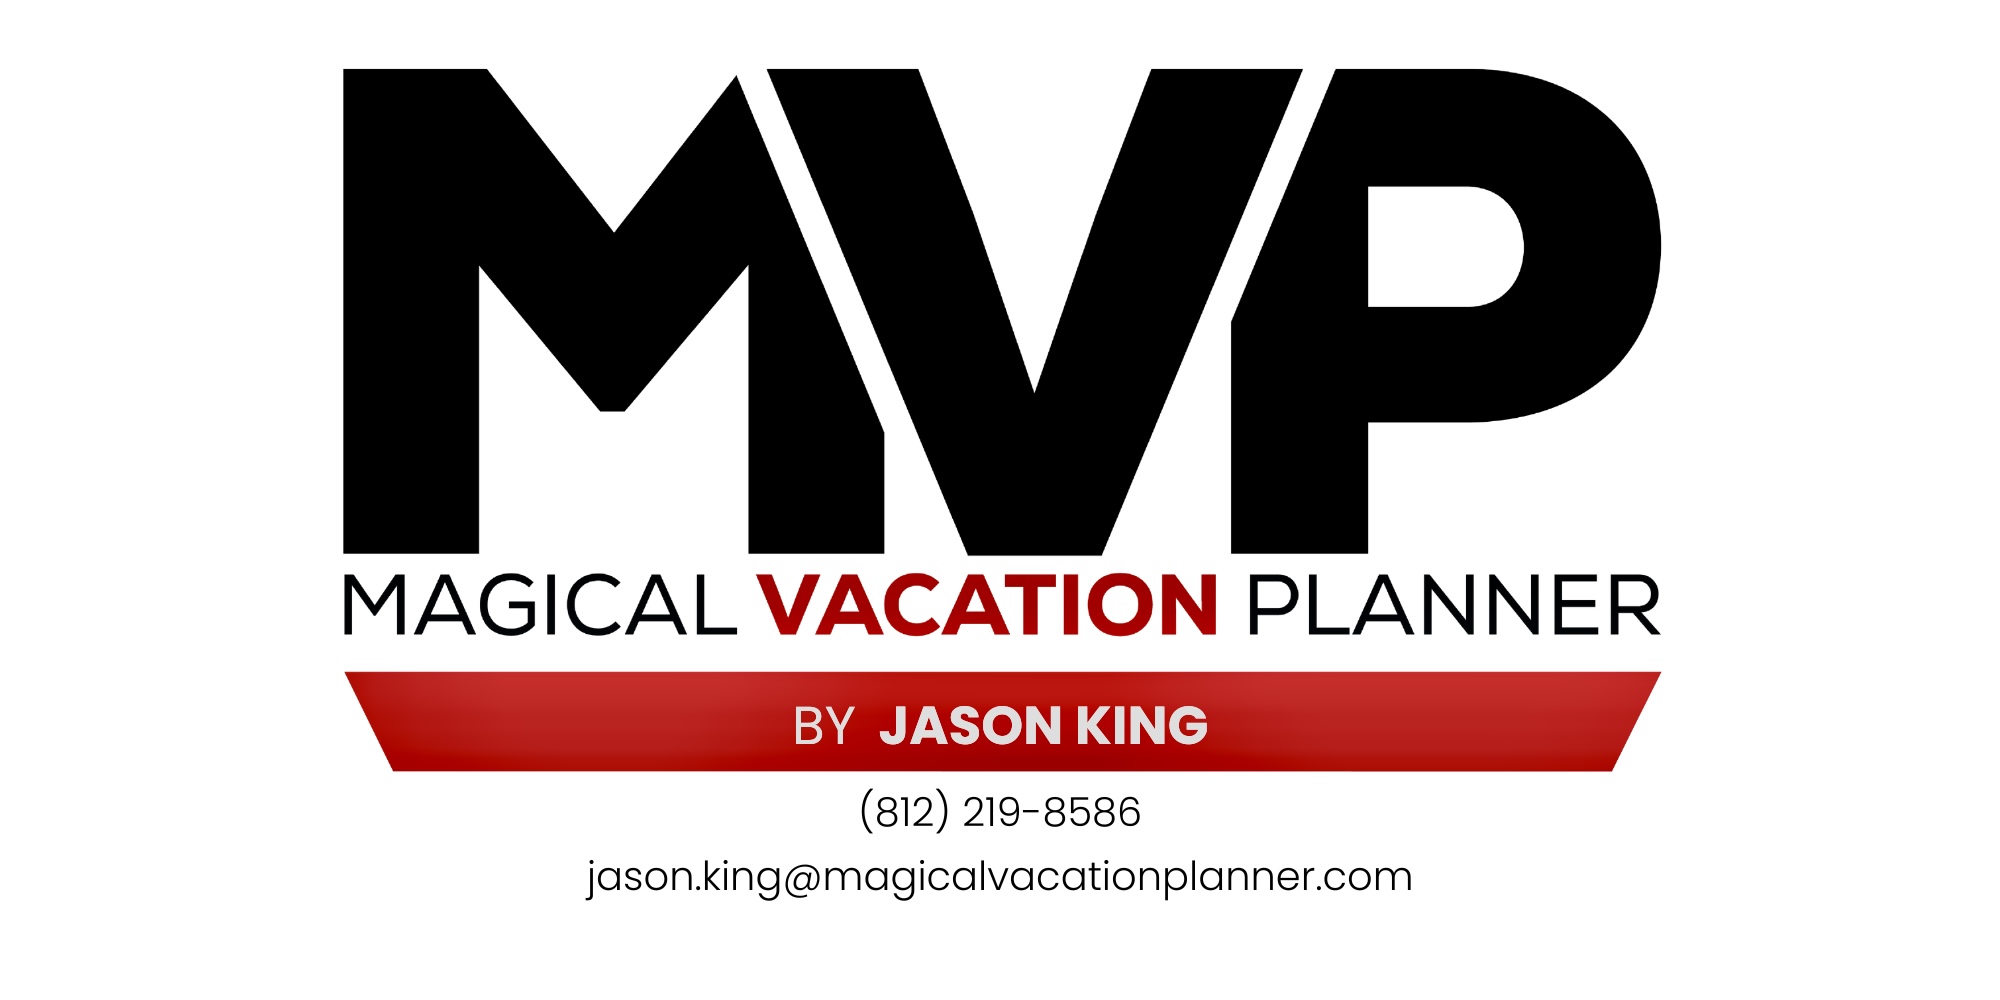 Magical Vacation Planner by Jason King 